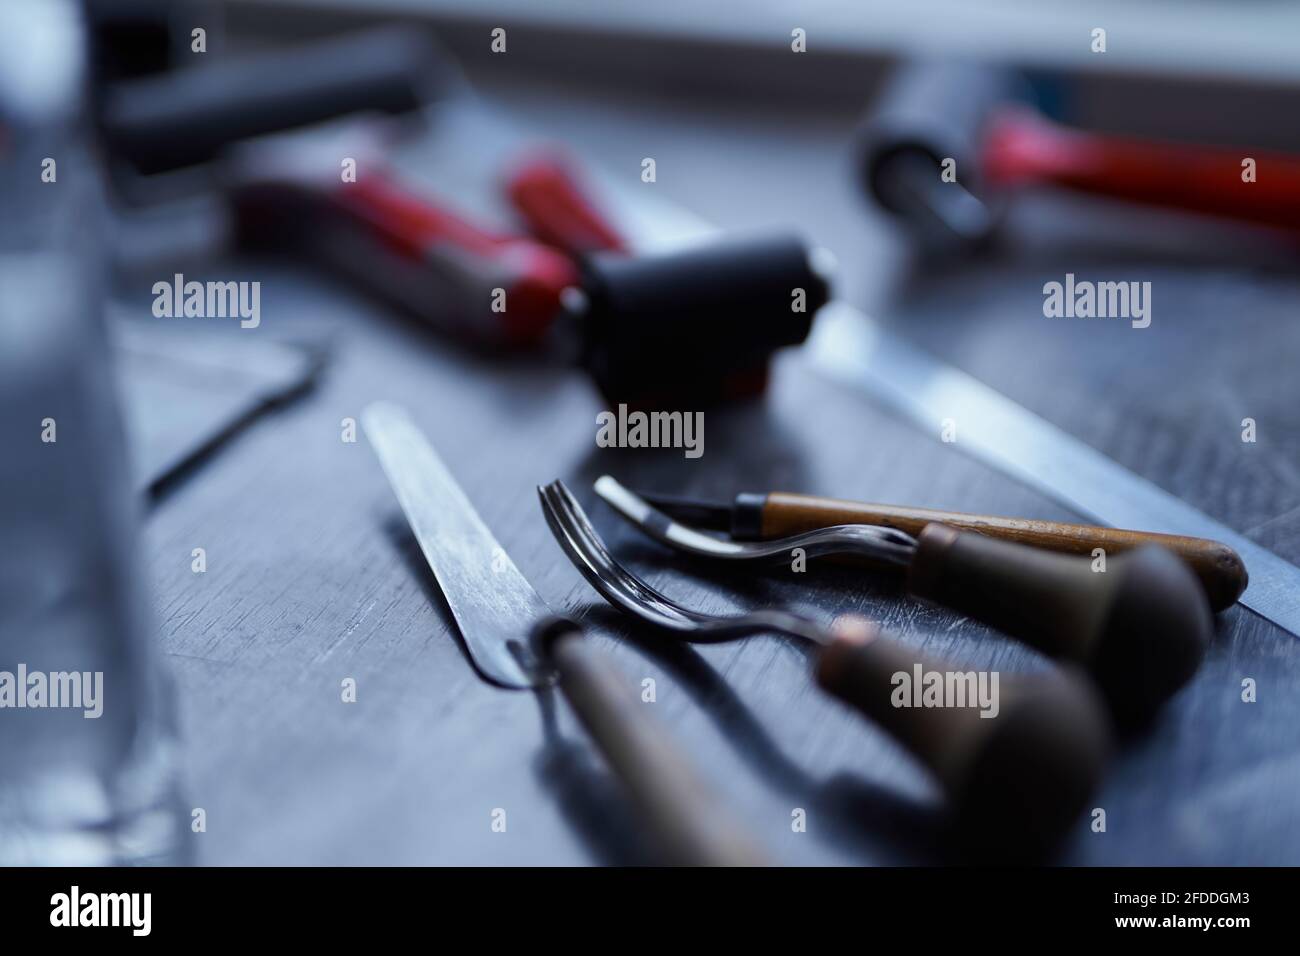 Linocut concept. Working tools in red and black colors on dark table.  Cutting instruments, ink roller and other tools for linocut making. High  quality photo Stock Photo - Alamy